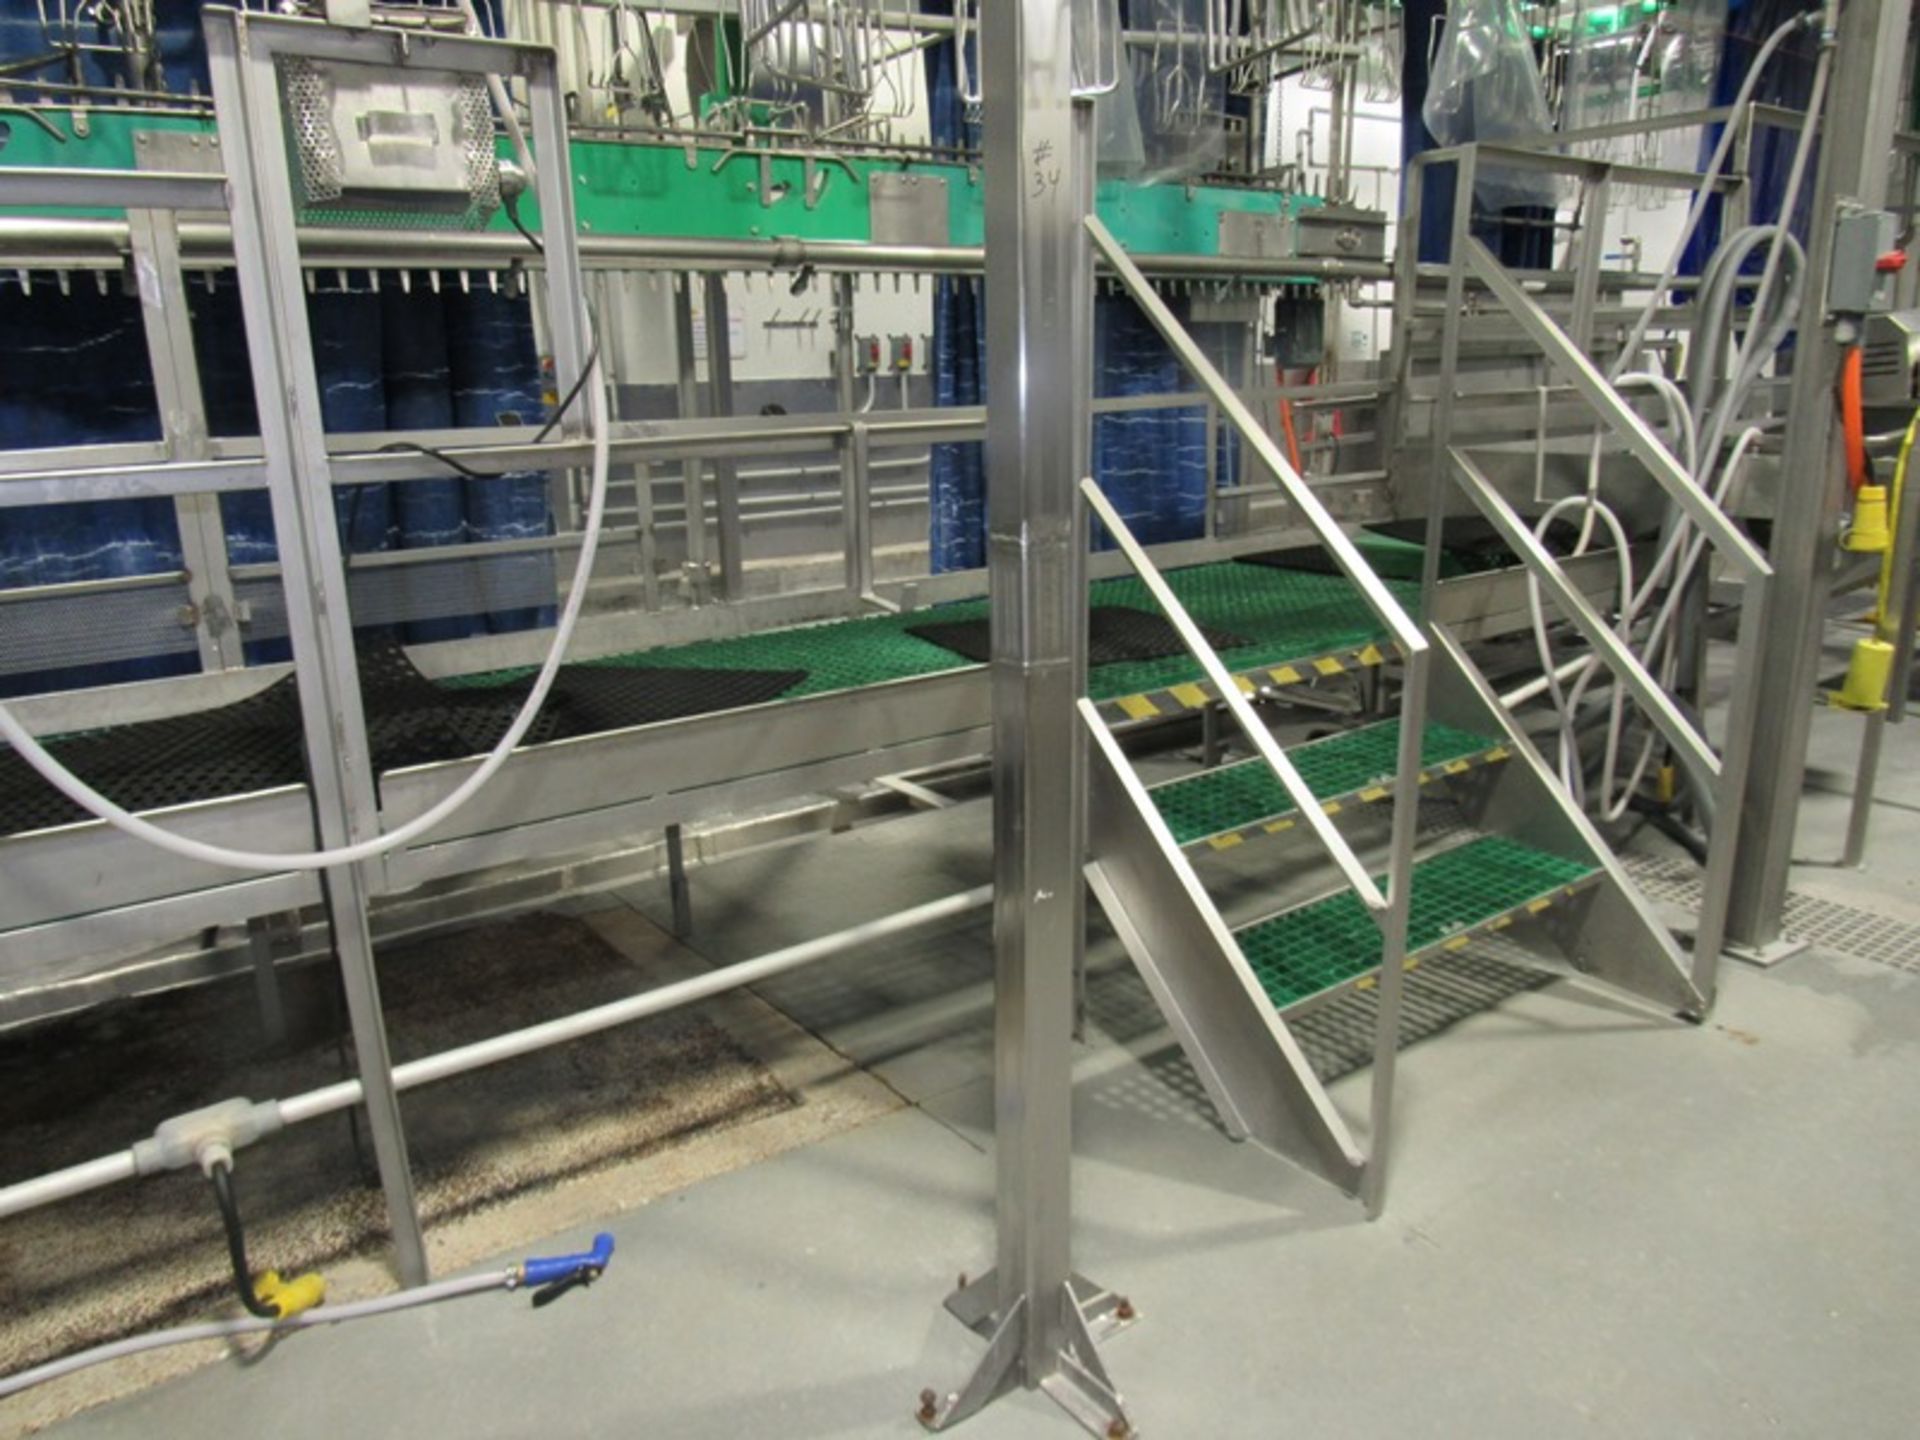 Stainless Steel Work Platform, 44" W (6' wide with stairs) X 25' L X 28" T, 6' tall | Rig Fee: $225 - Image 3 of 3